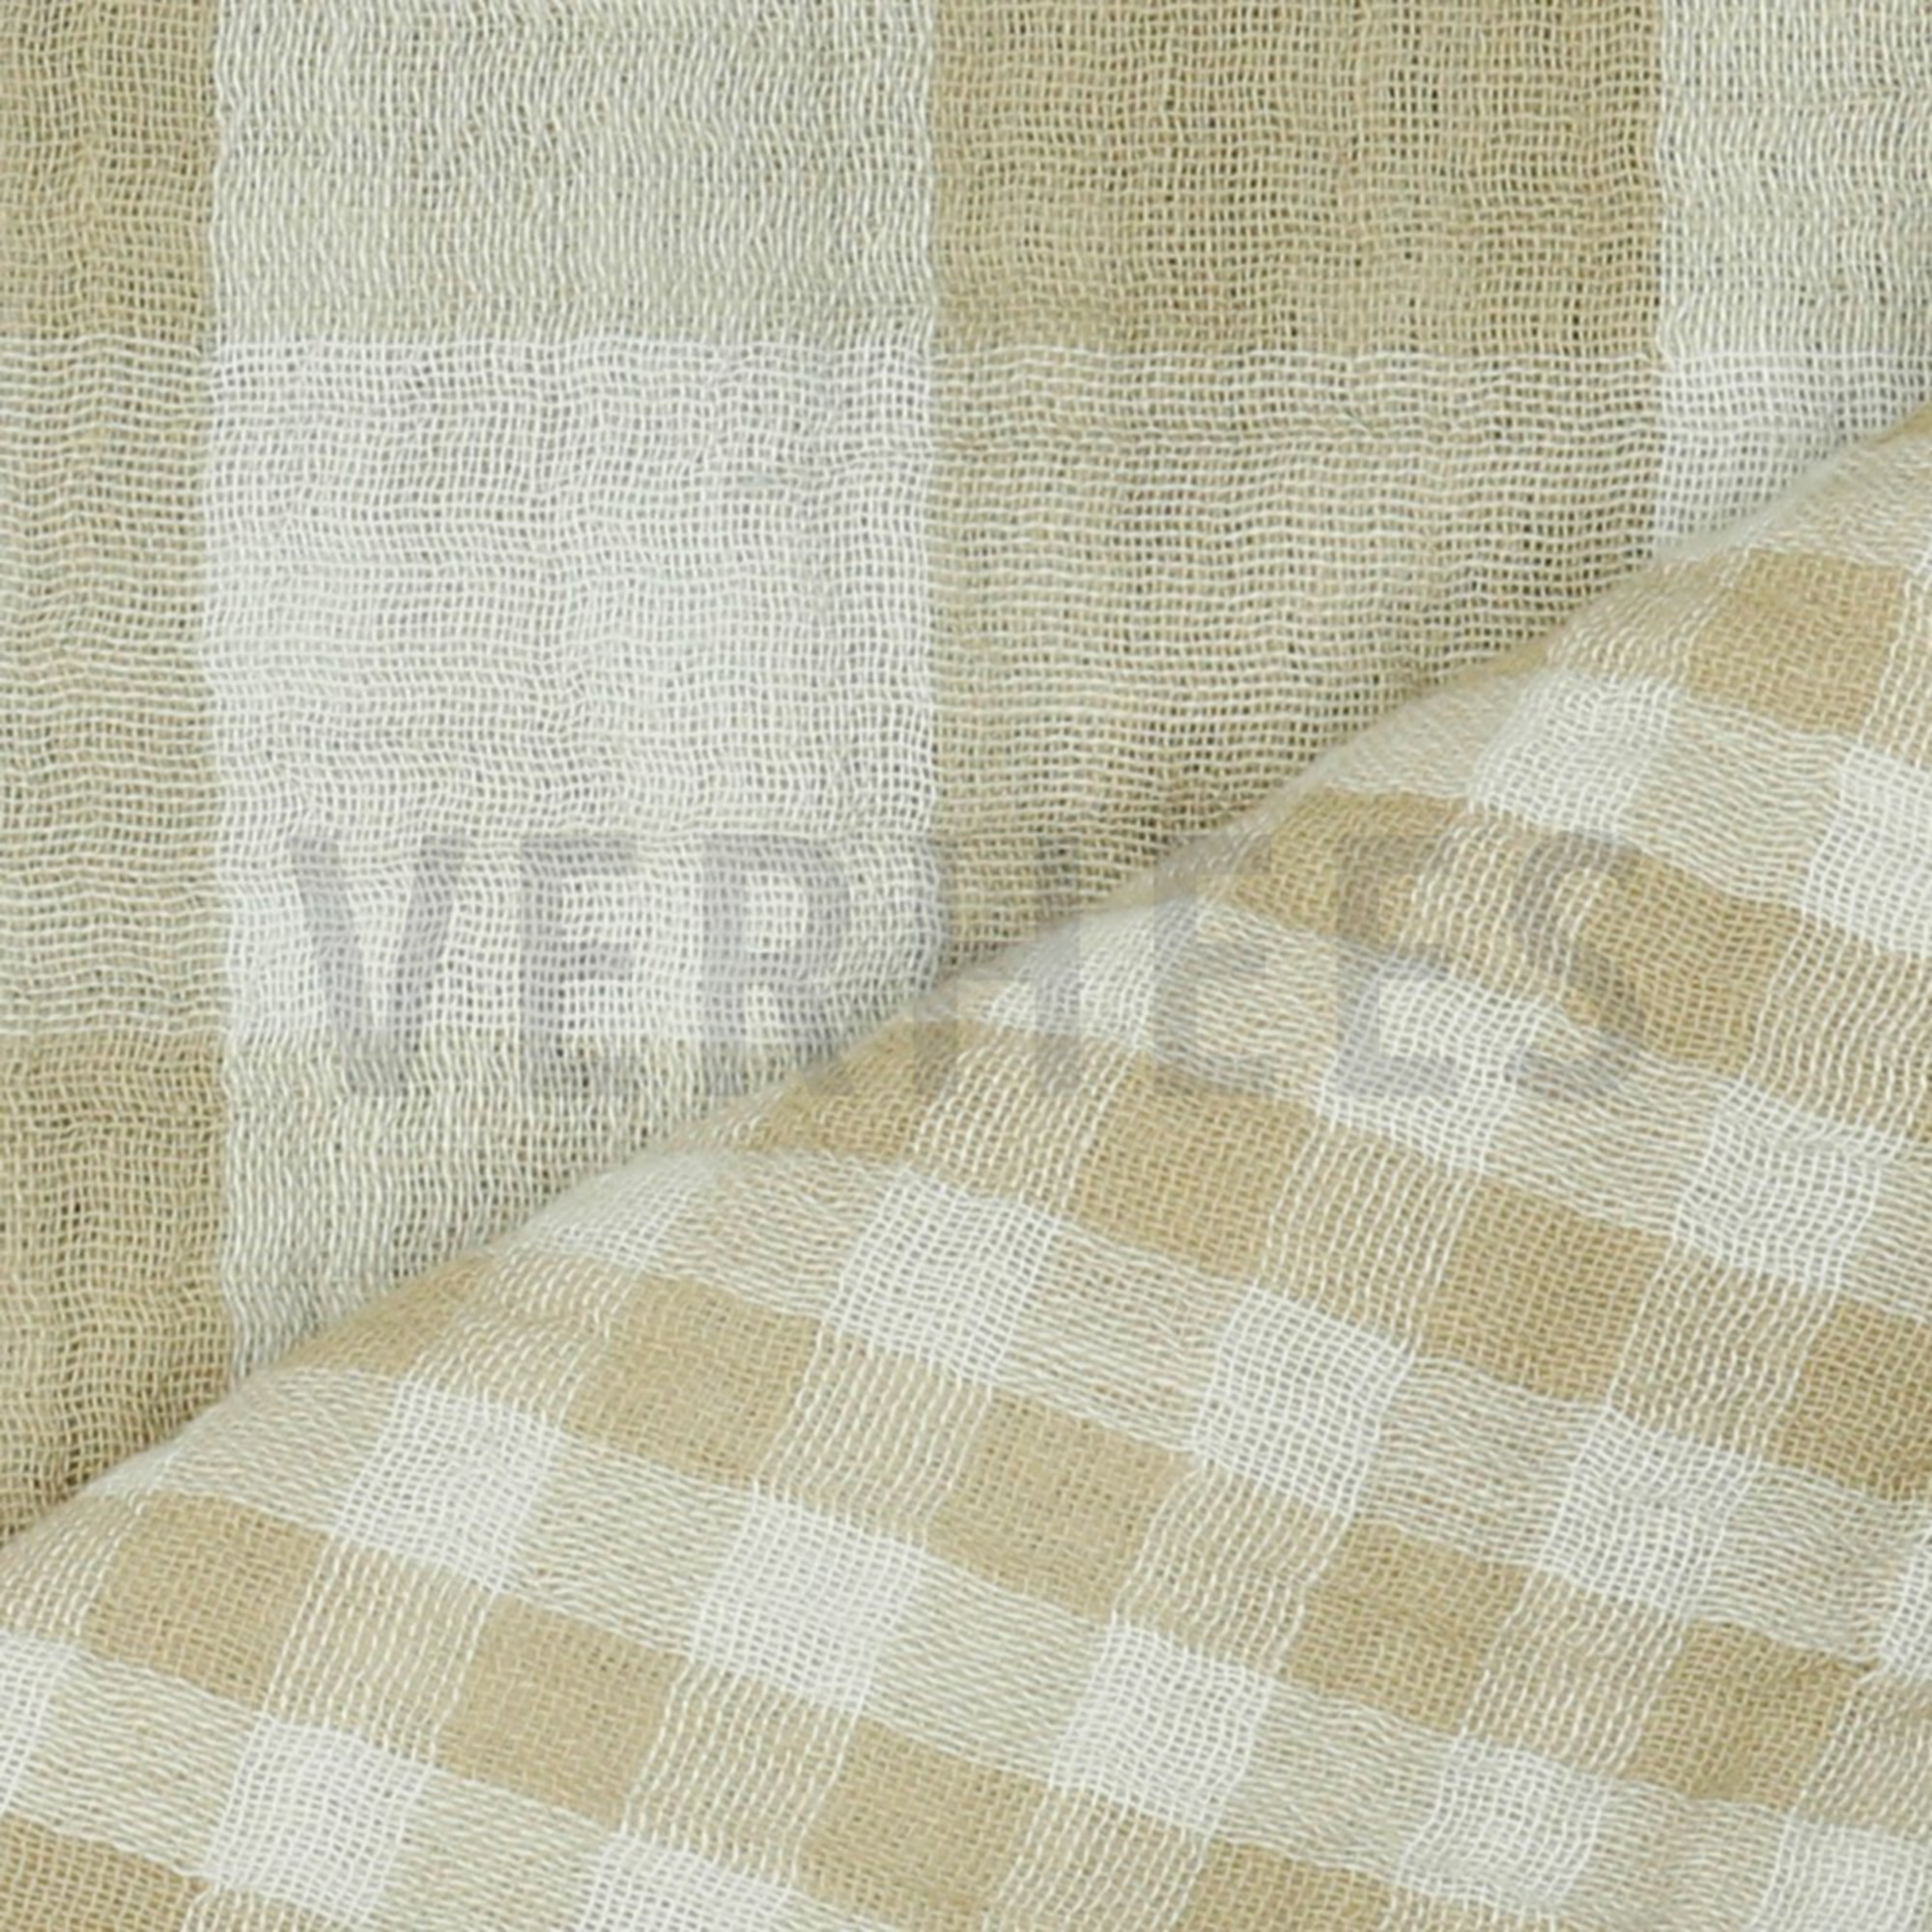 DOUBLE GAUZE DOUBLE SIDED CHECKS BEIGE (high resolution) #3